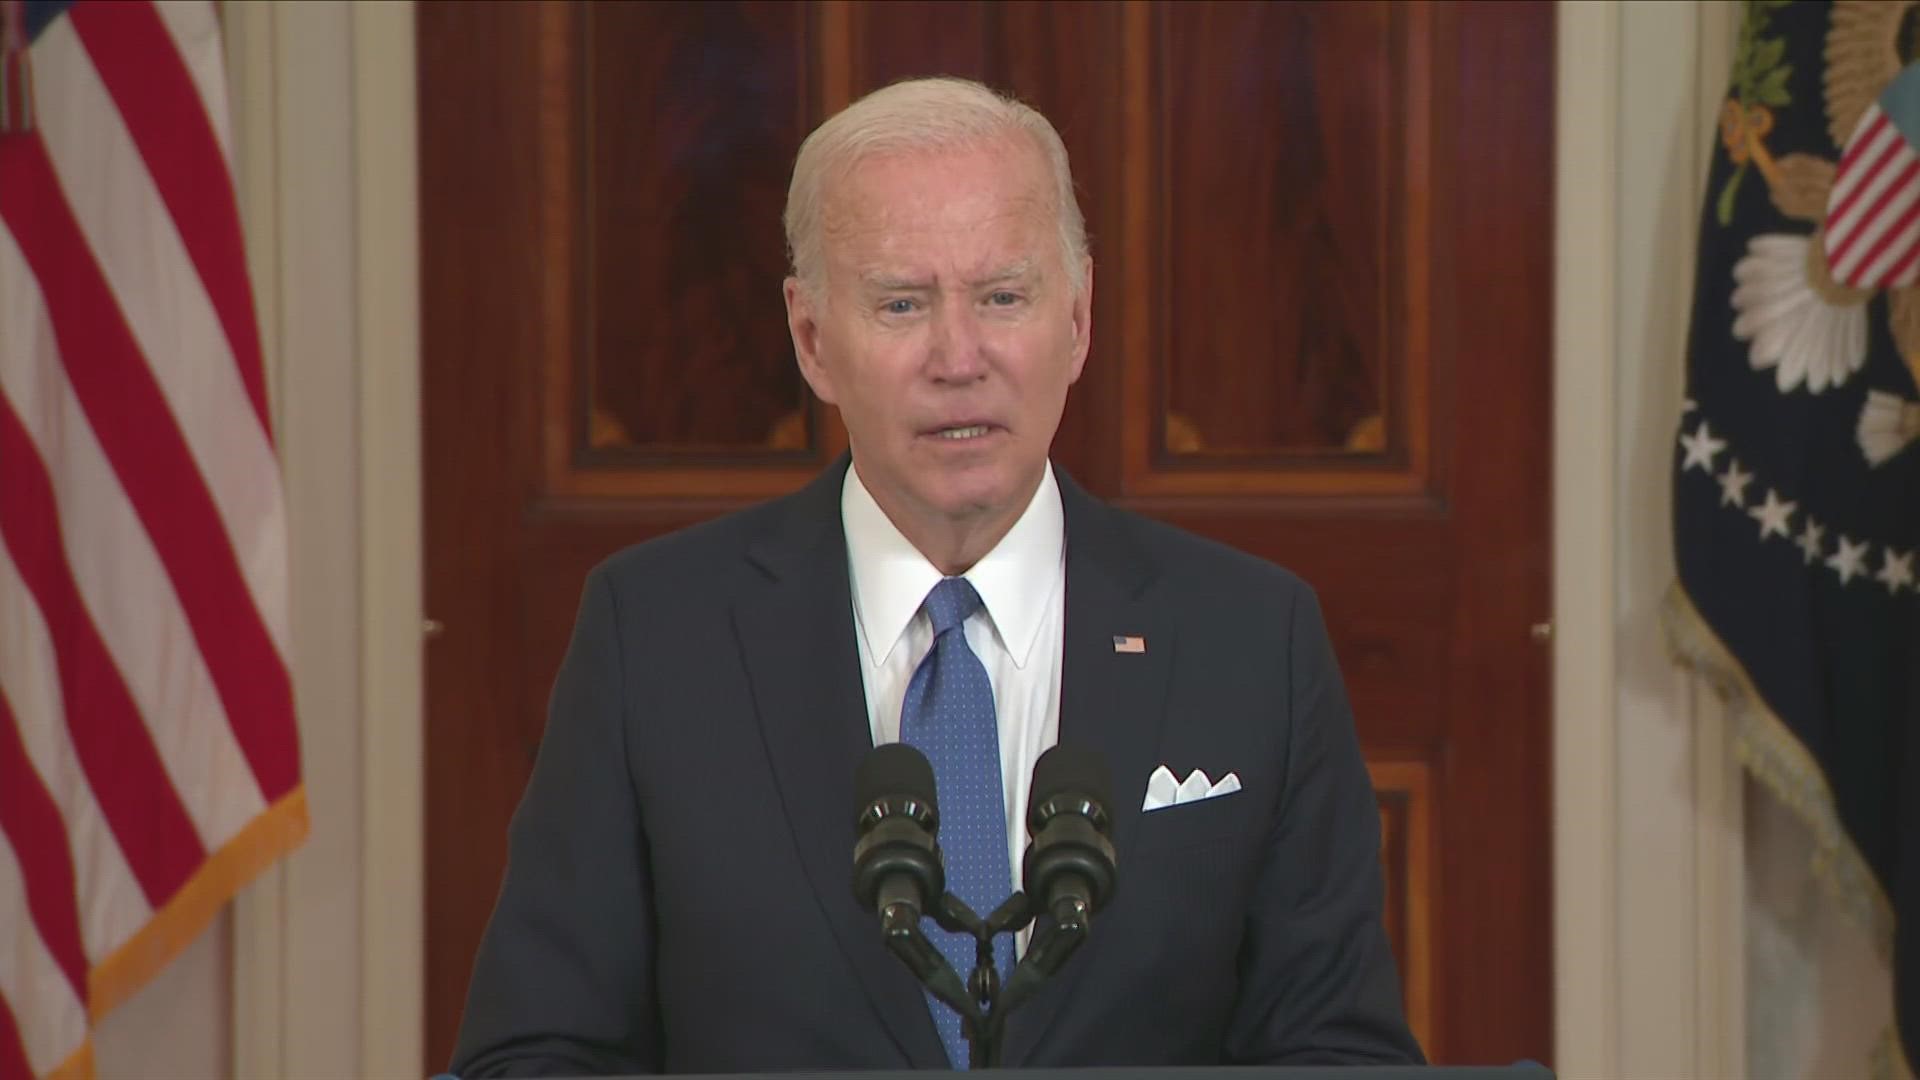 President Joe Biden said the decision to overturn Roe v. Wade -- largely orchestrated by Trump's three appointees -- "is taking America back 150 years."